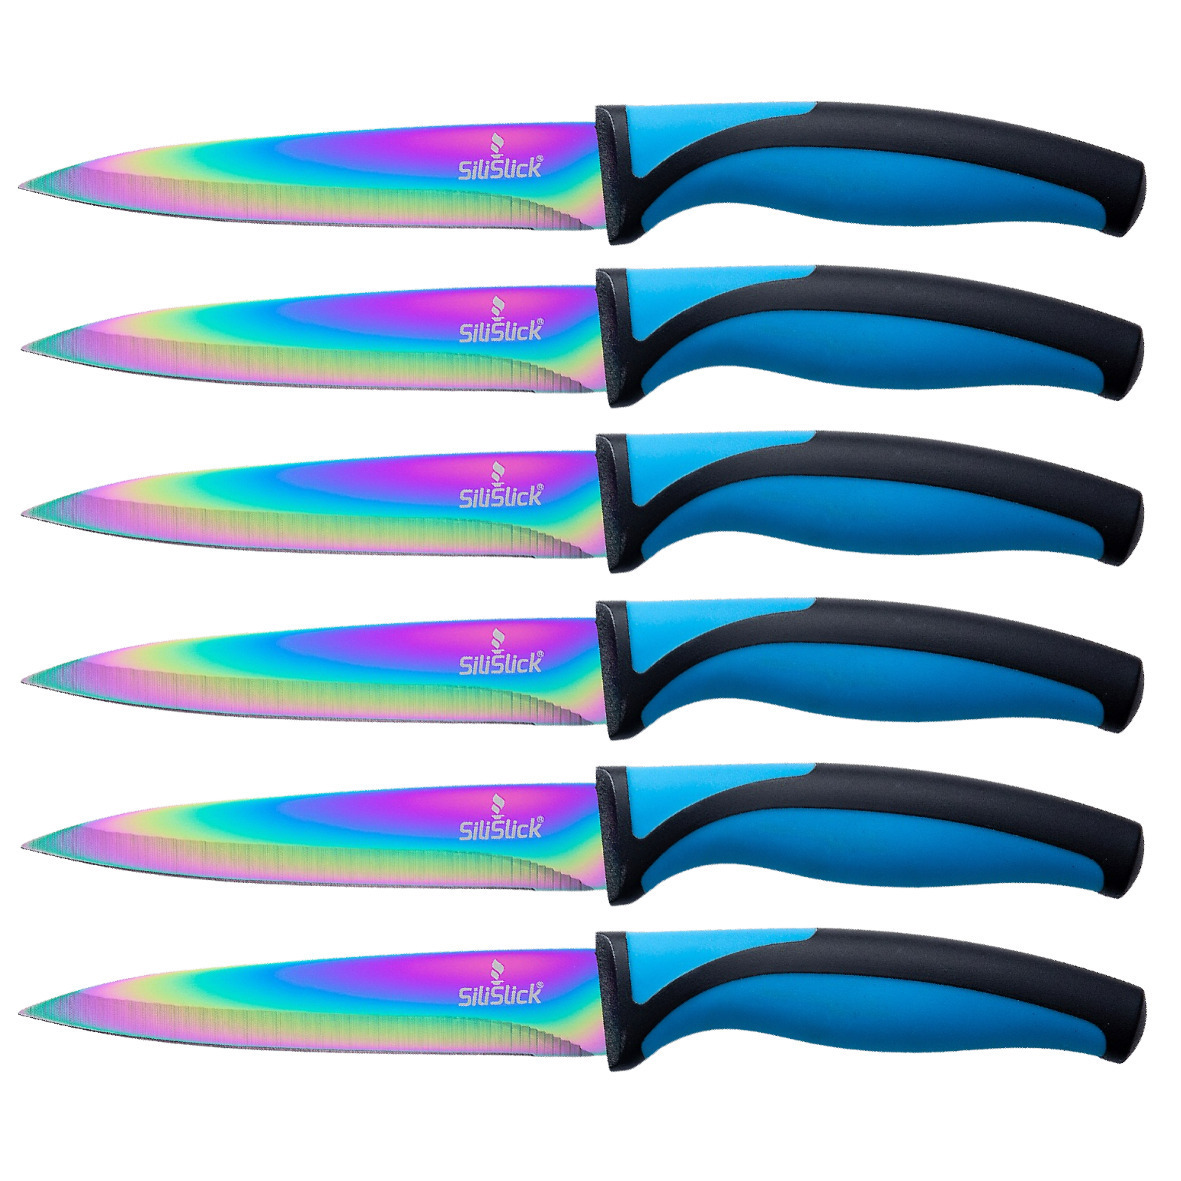 SiliSlick Stainless Steel Steak Knife Set Of 6 - Rainbow Iridescent Blue Handle - Titanium Coated With Straight Edge For Cutting Meat